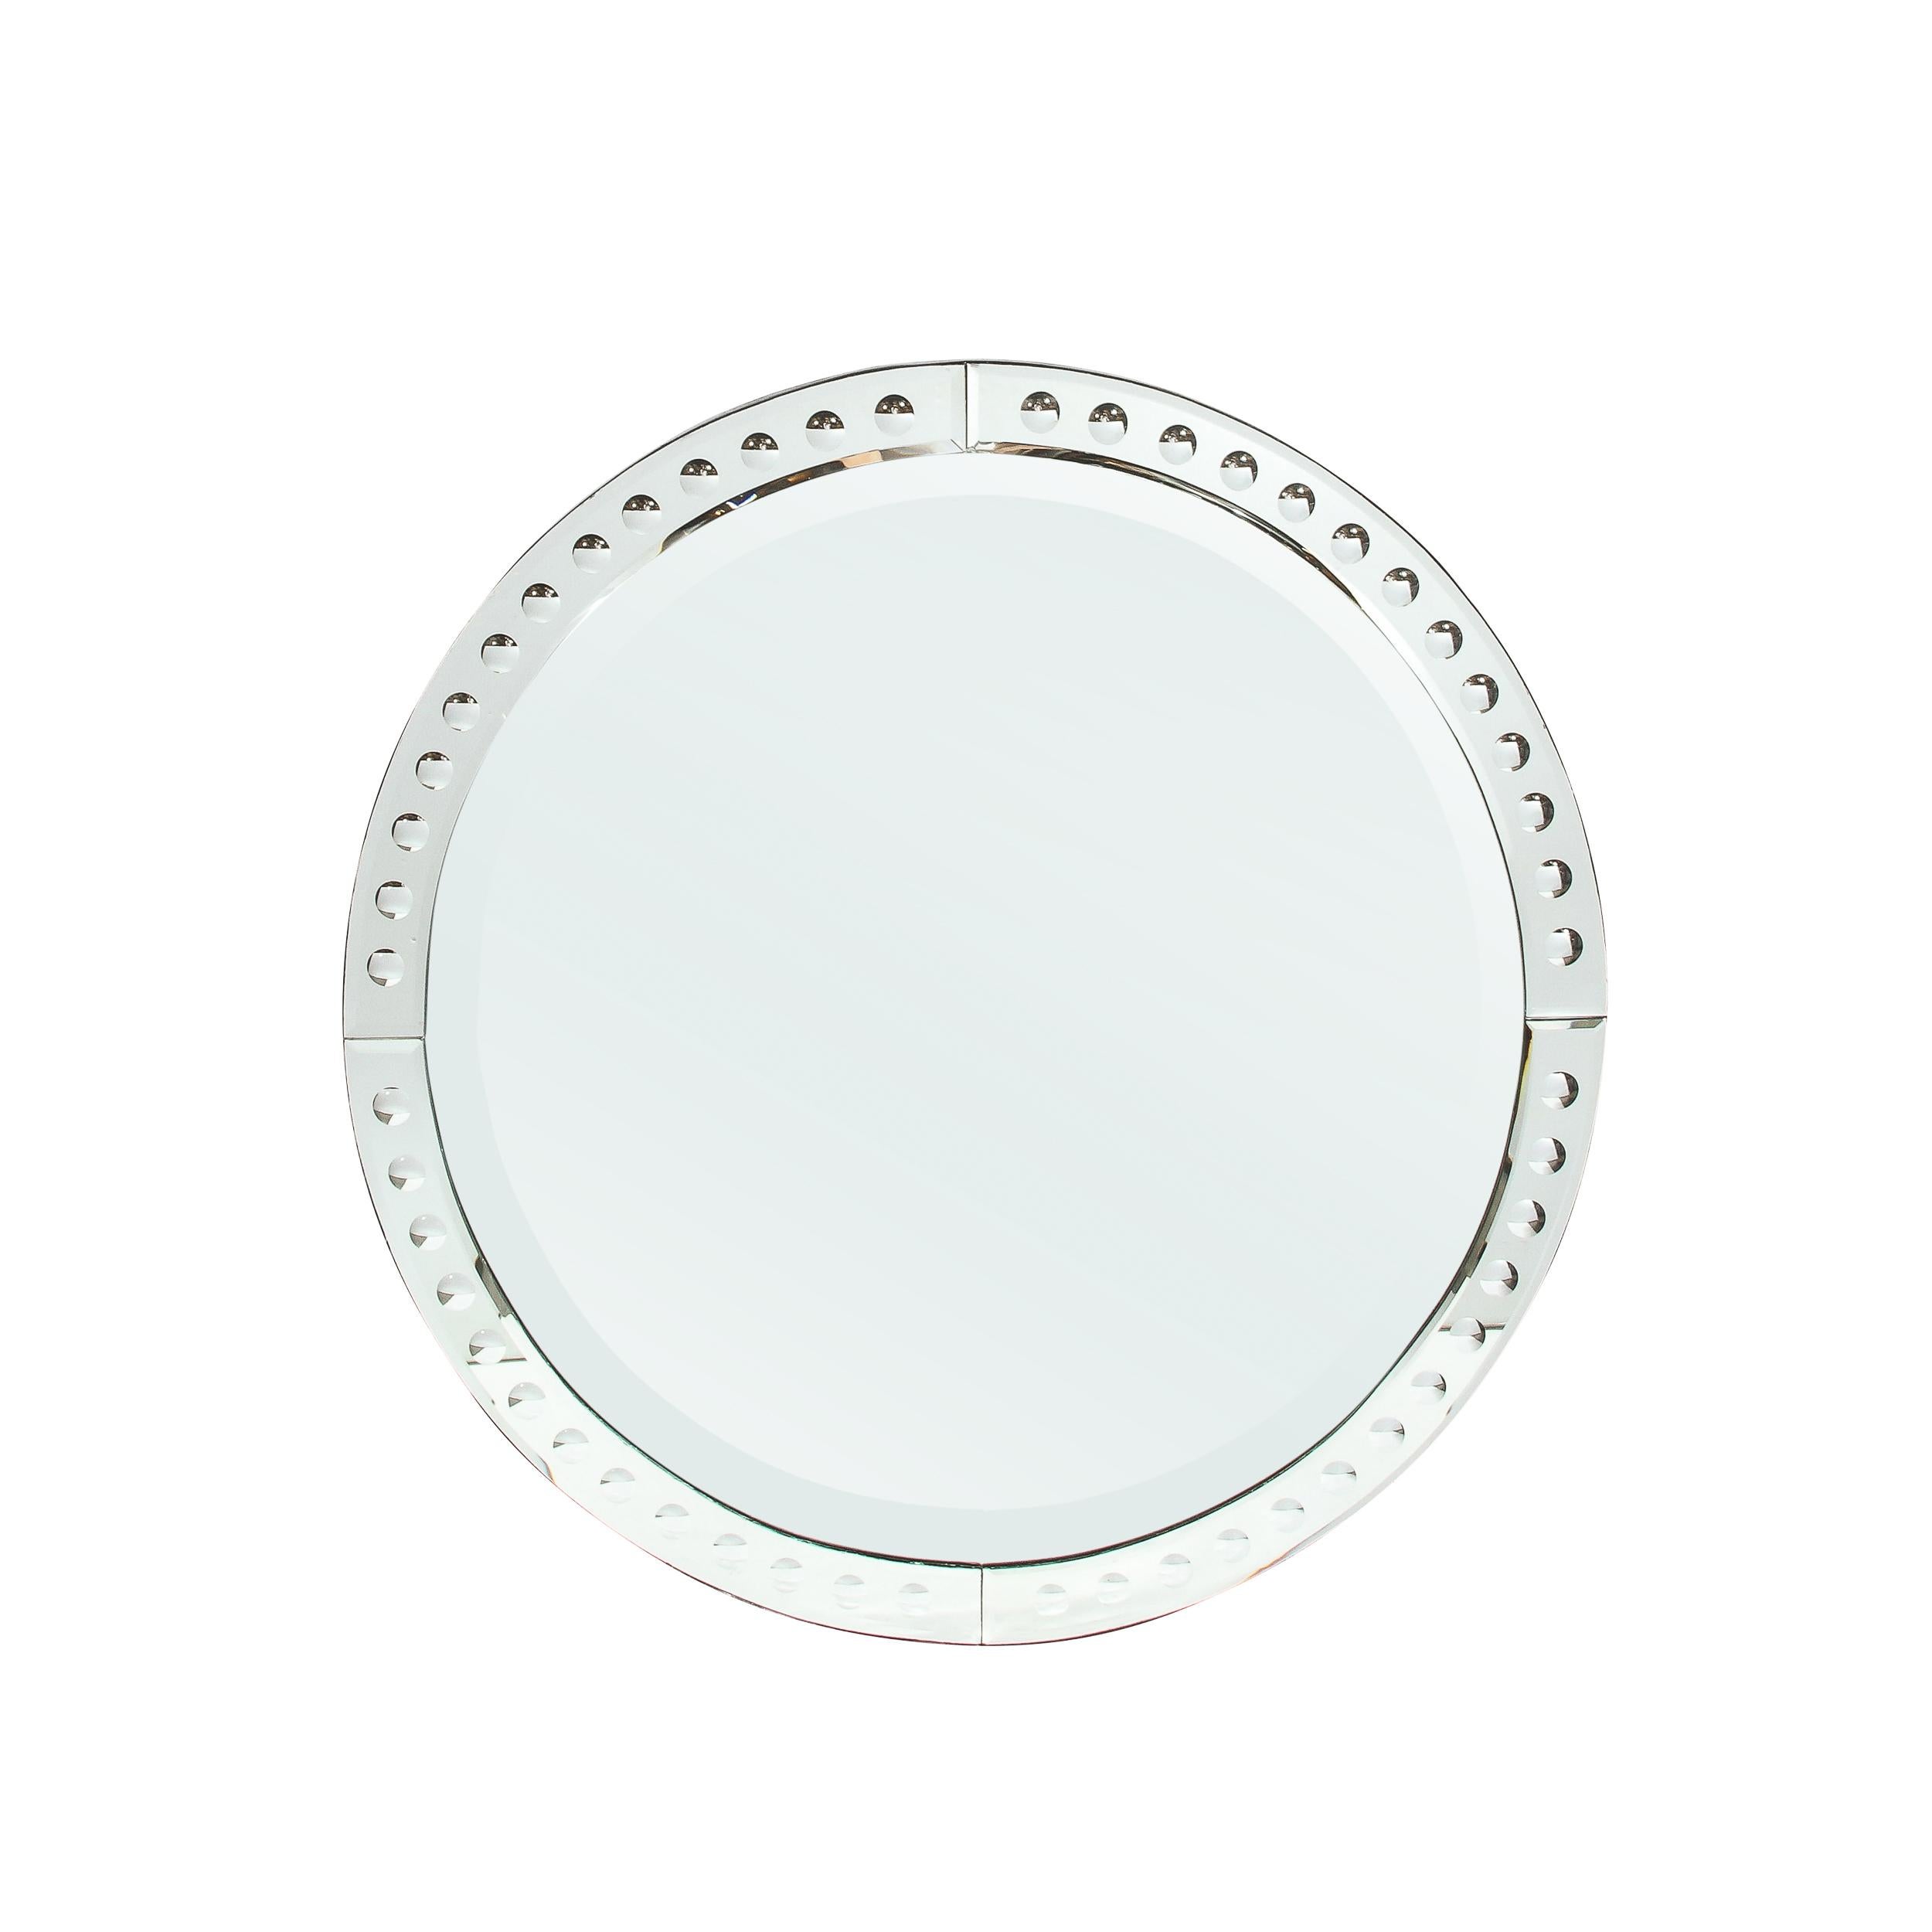 This sophisticated and minimal Mid-Century Modernist Round Mirror W/ Beveled Edge and Reversed Etched Detailing originates from France, Circa 1950. Minimal and beautifully proportioned, this mirror features a border composed of four panels of curved